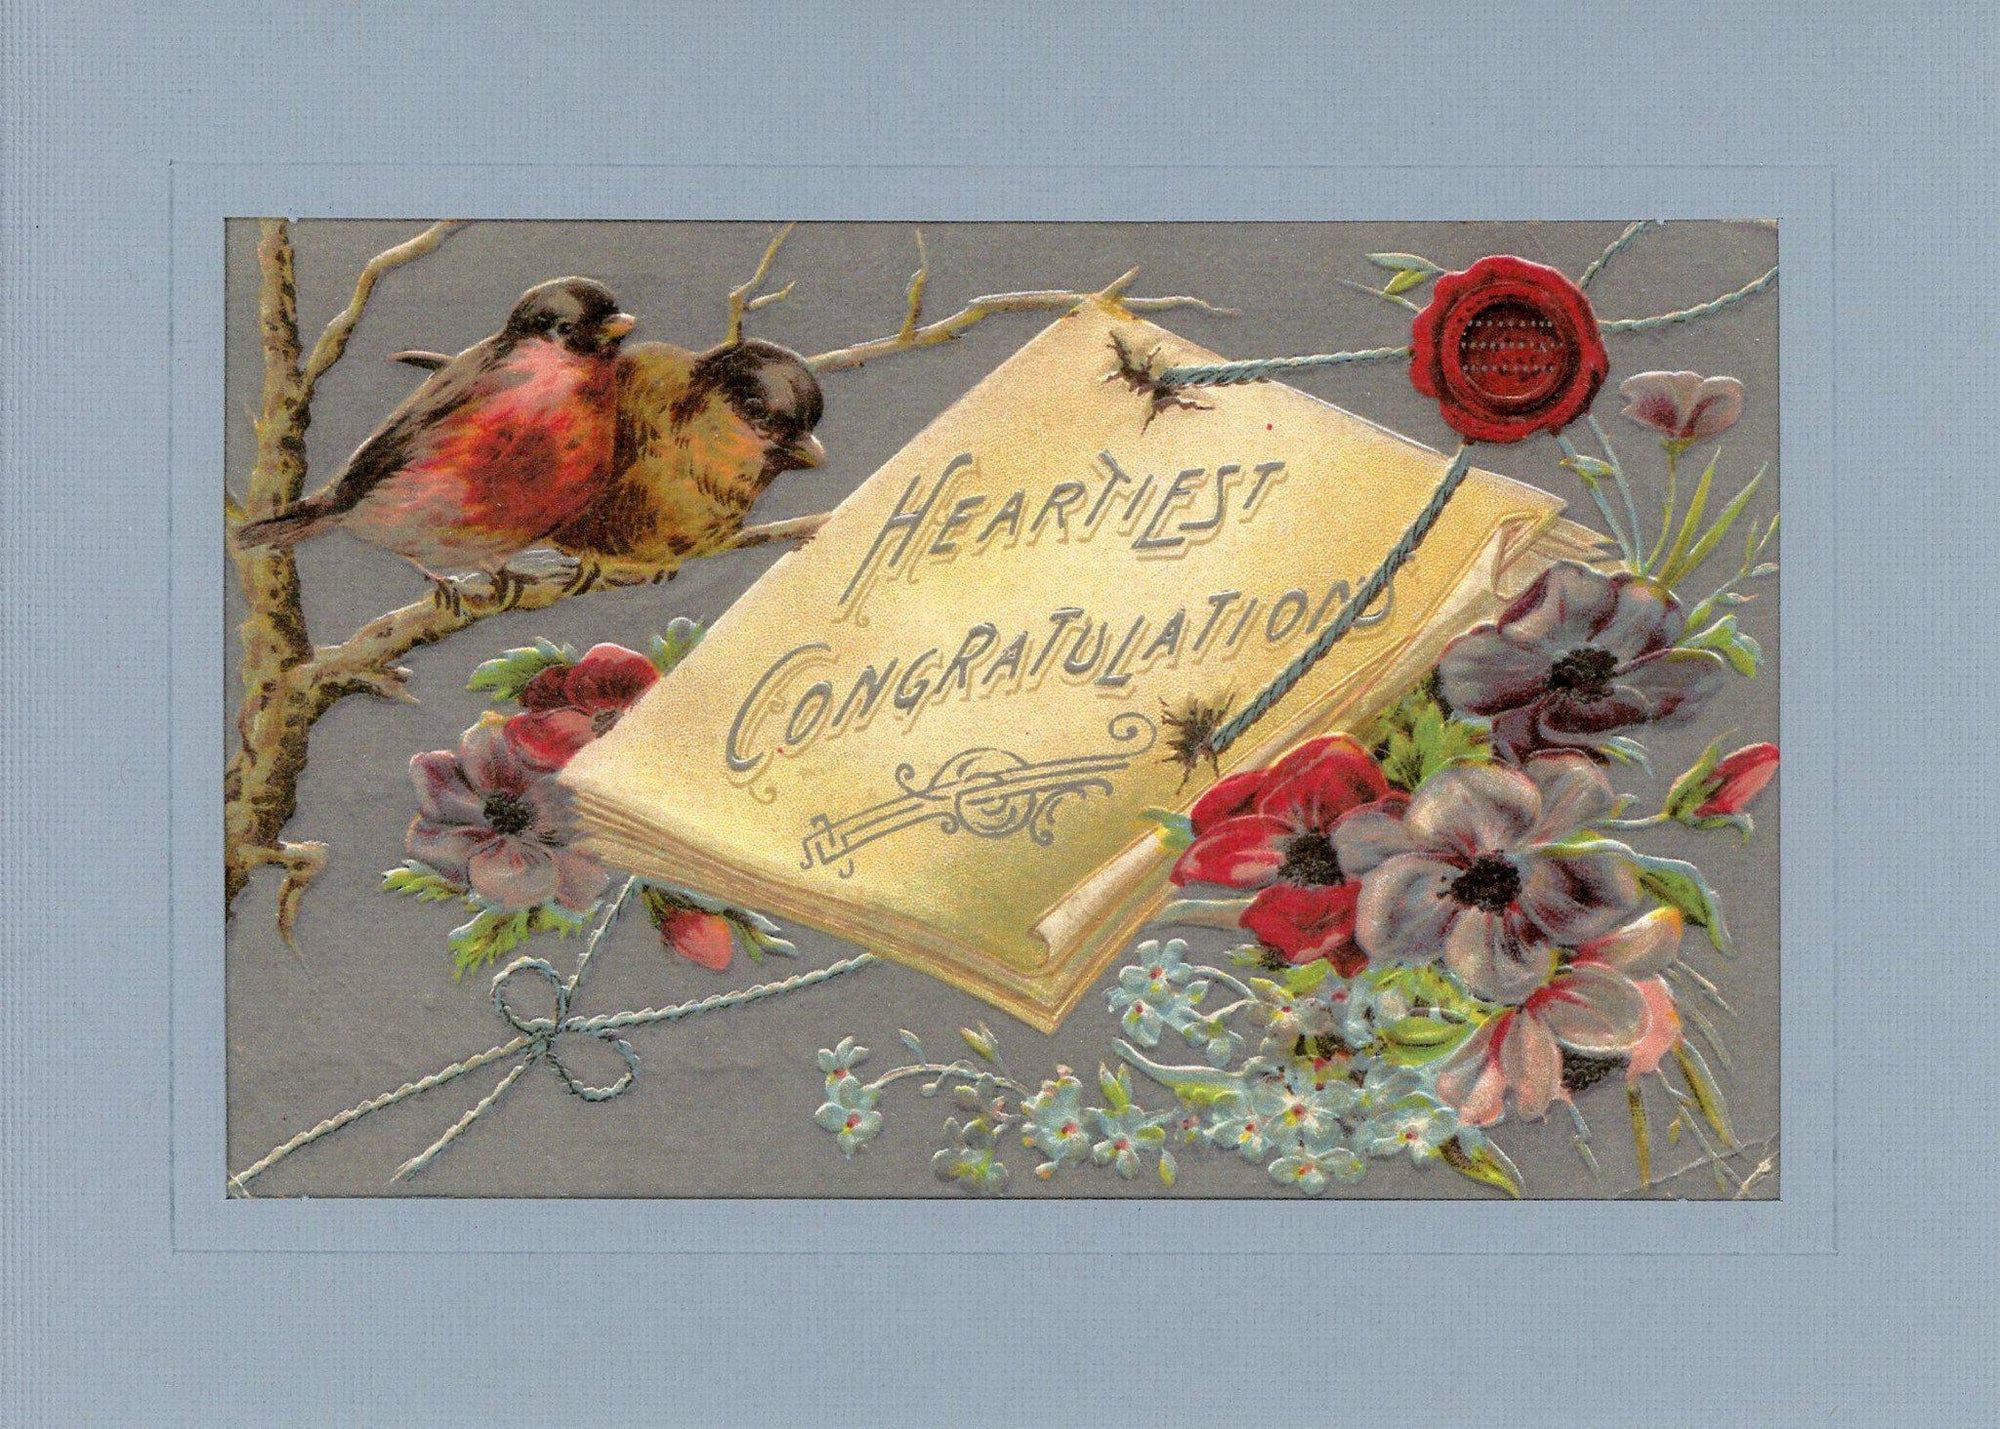 Heartiest Congratulations-Greetings from the Past-Plymouth Cards